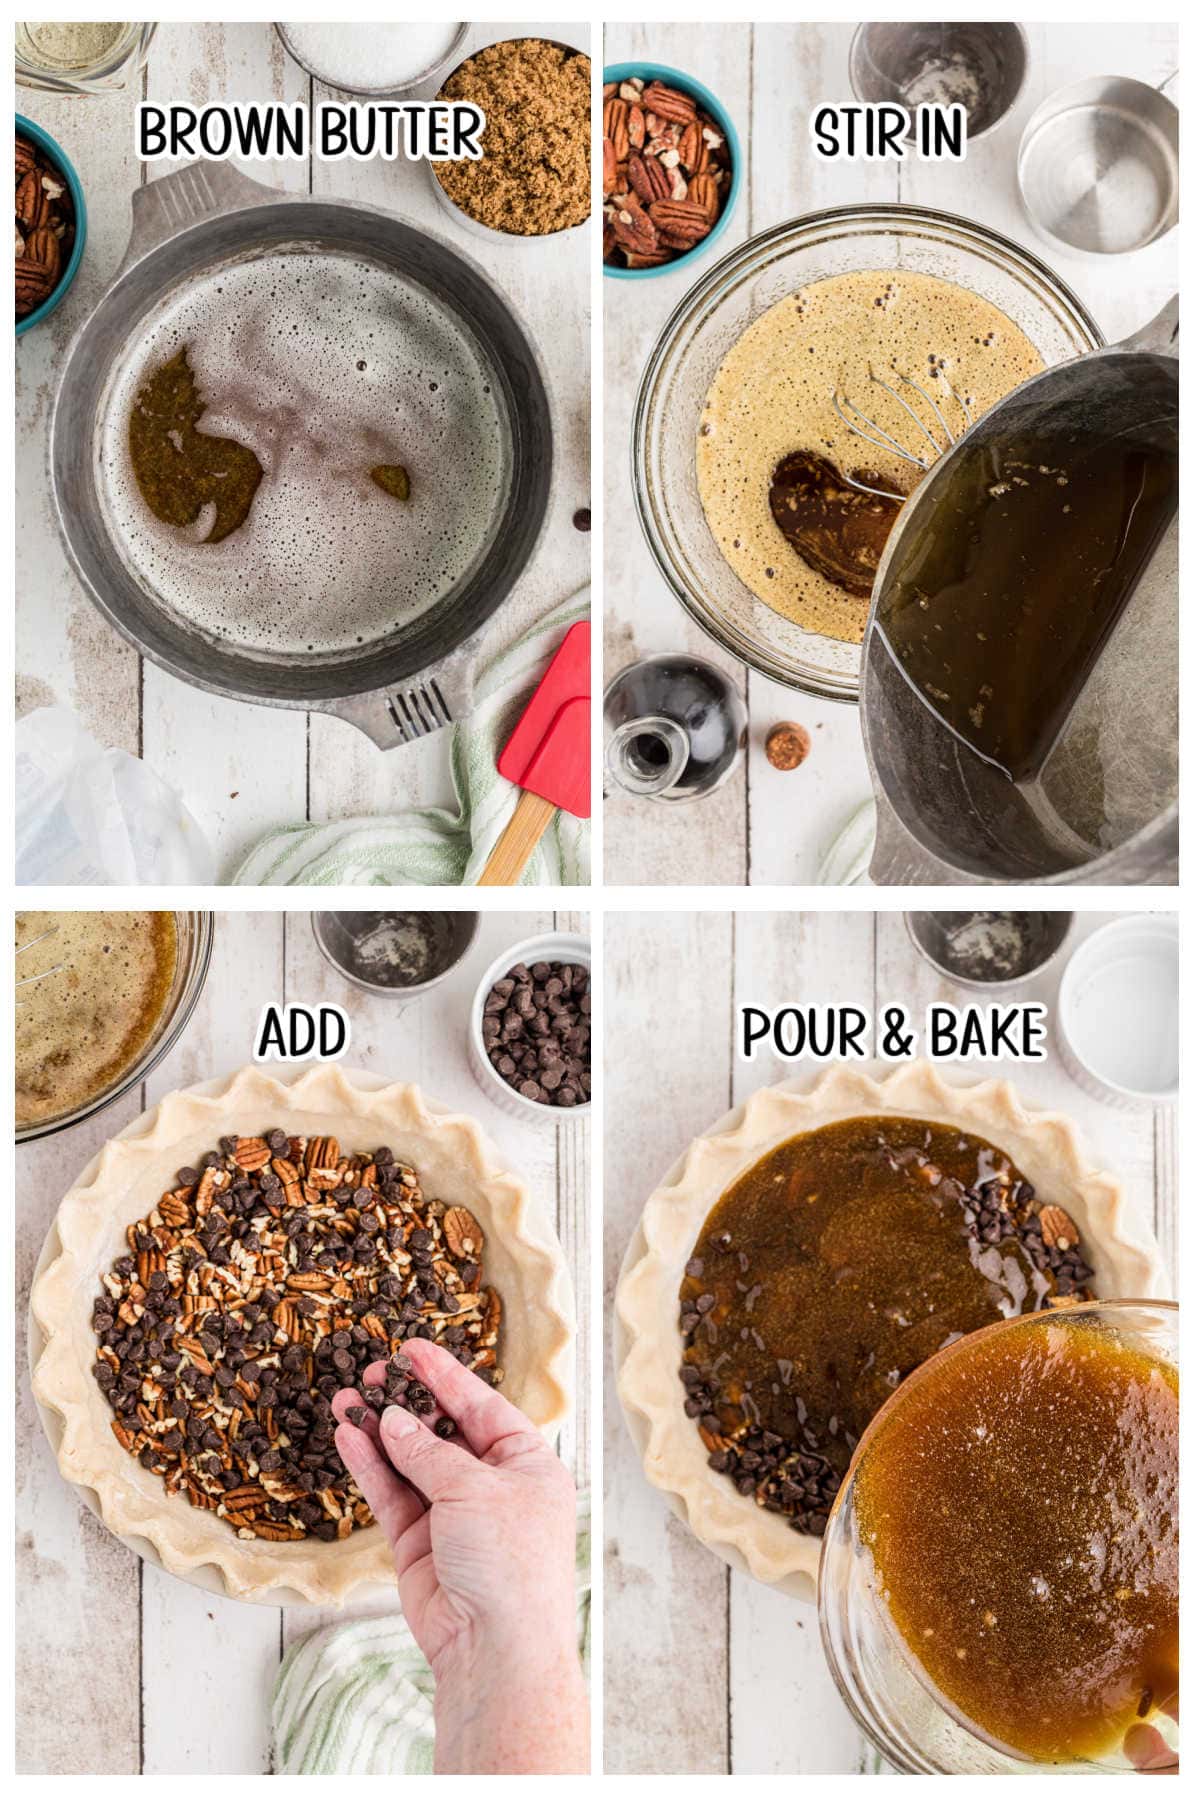 Four overhead photos in a grid with text overlay showing main recipe steps. 1) Butter browning in a saucepan. 2) Stirring butter into wet ingredients. 3) A hand sprinkling pecans and chocolate chips into pie crust. 4) Pouring the wet mixture from photo two into the pie shell from photo three.